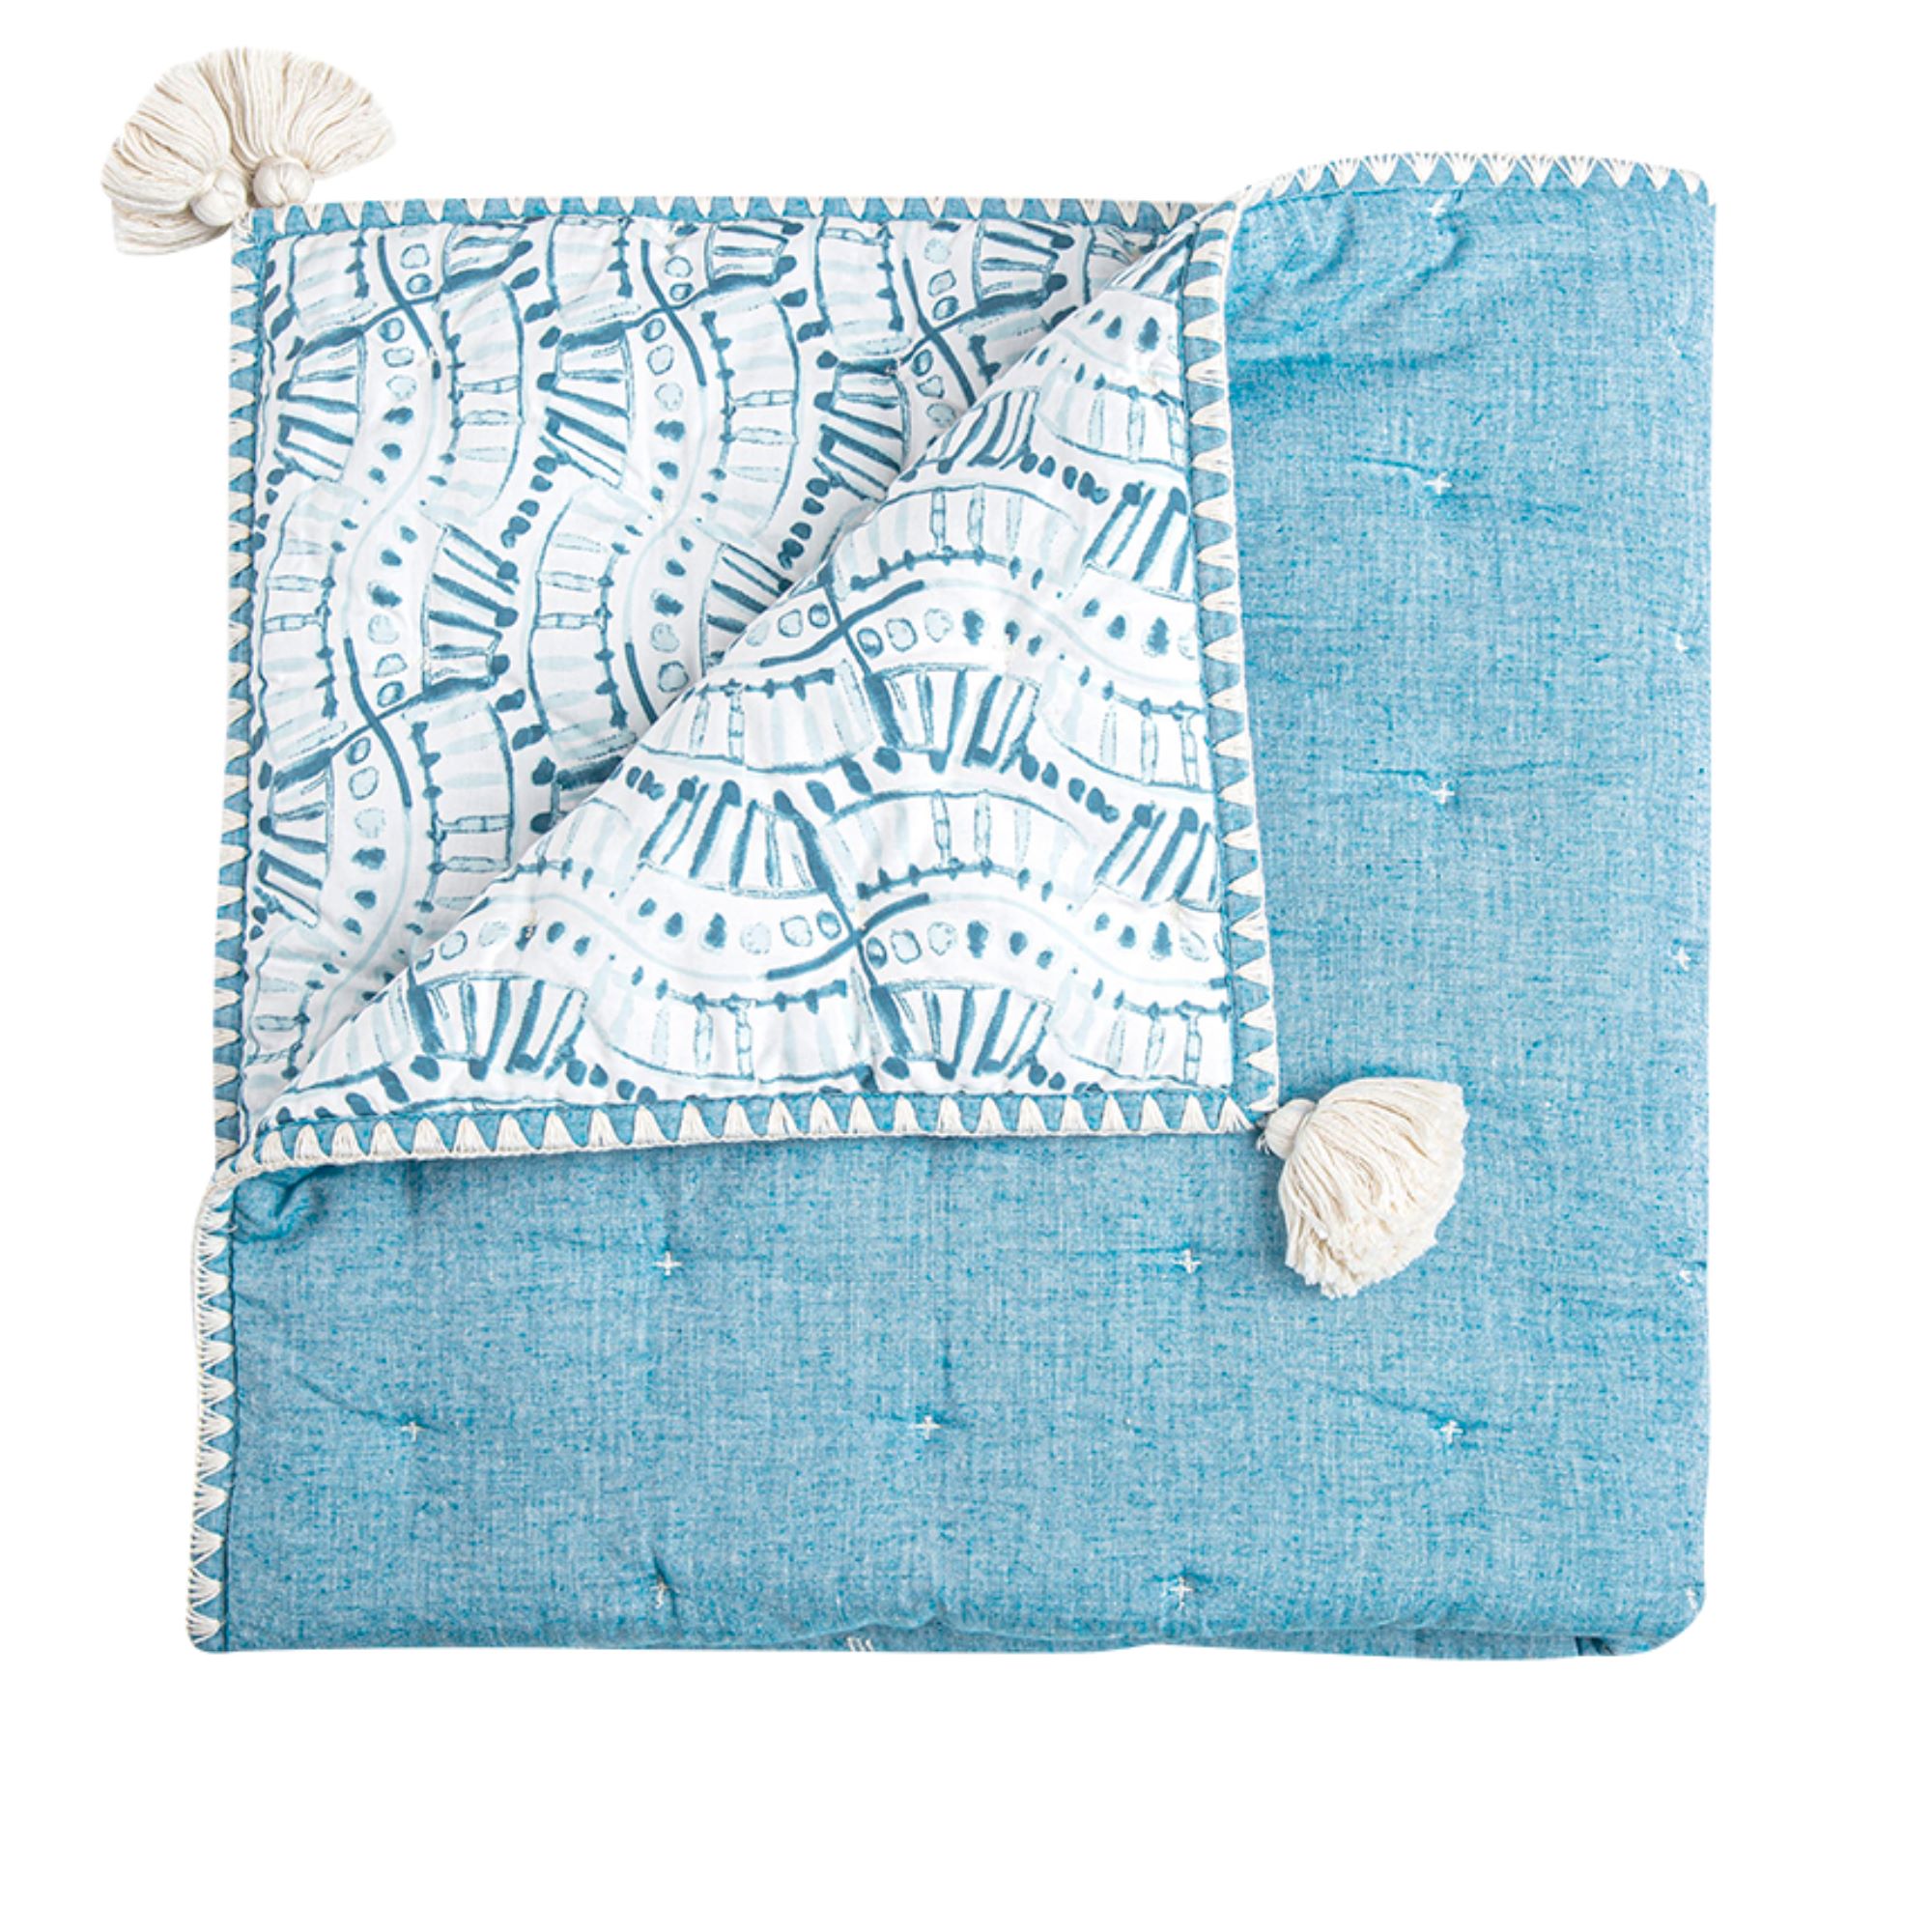 Blue quilted blanket on white background